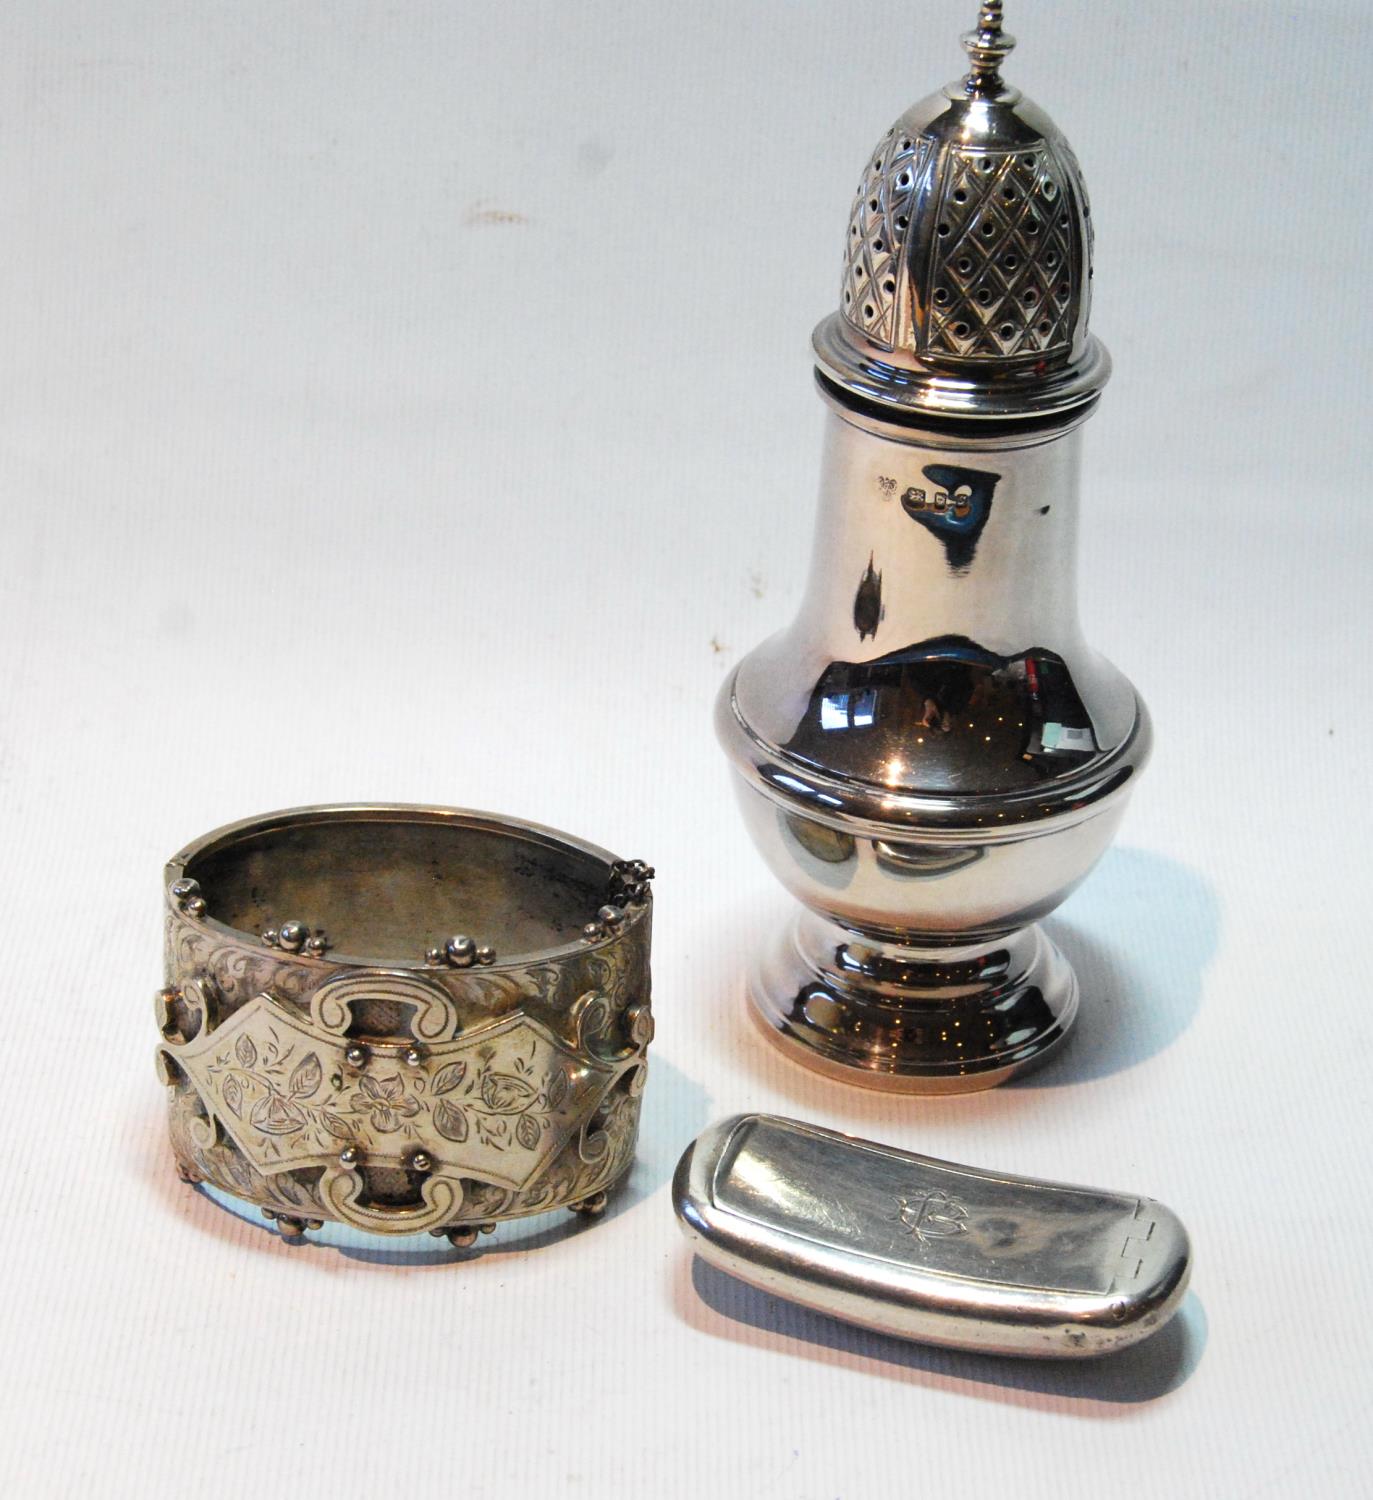 Silver baluster caster by Vanders, 1973, a Victorian engraved silver bangle and a snuff box of